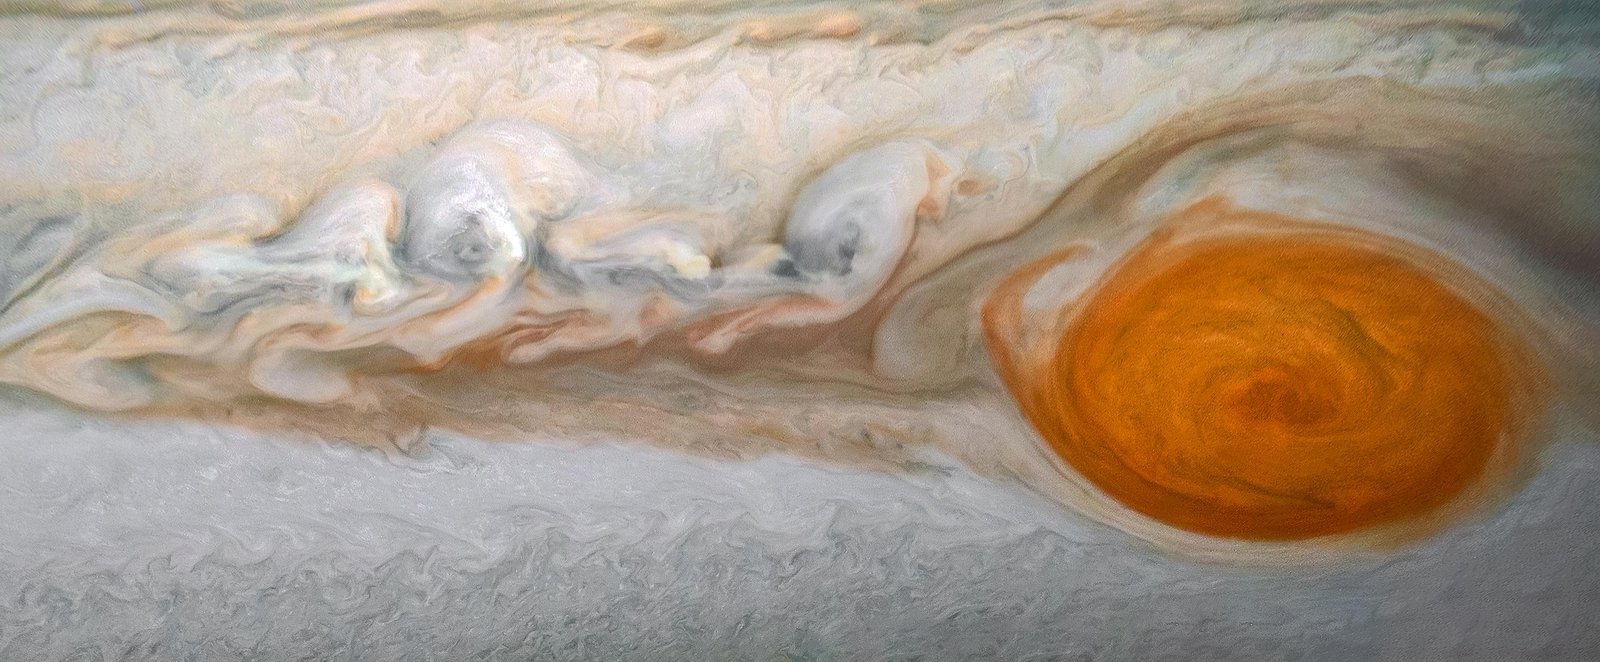 A close up of Jupiter's Great Red Spot